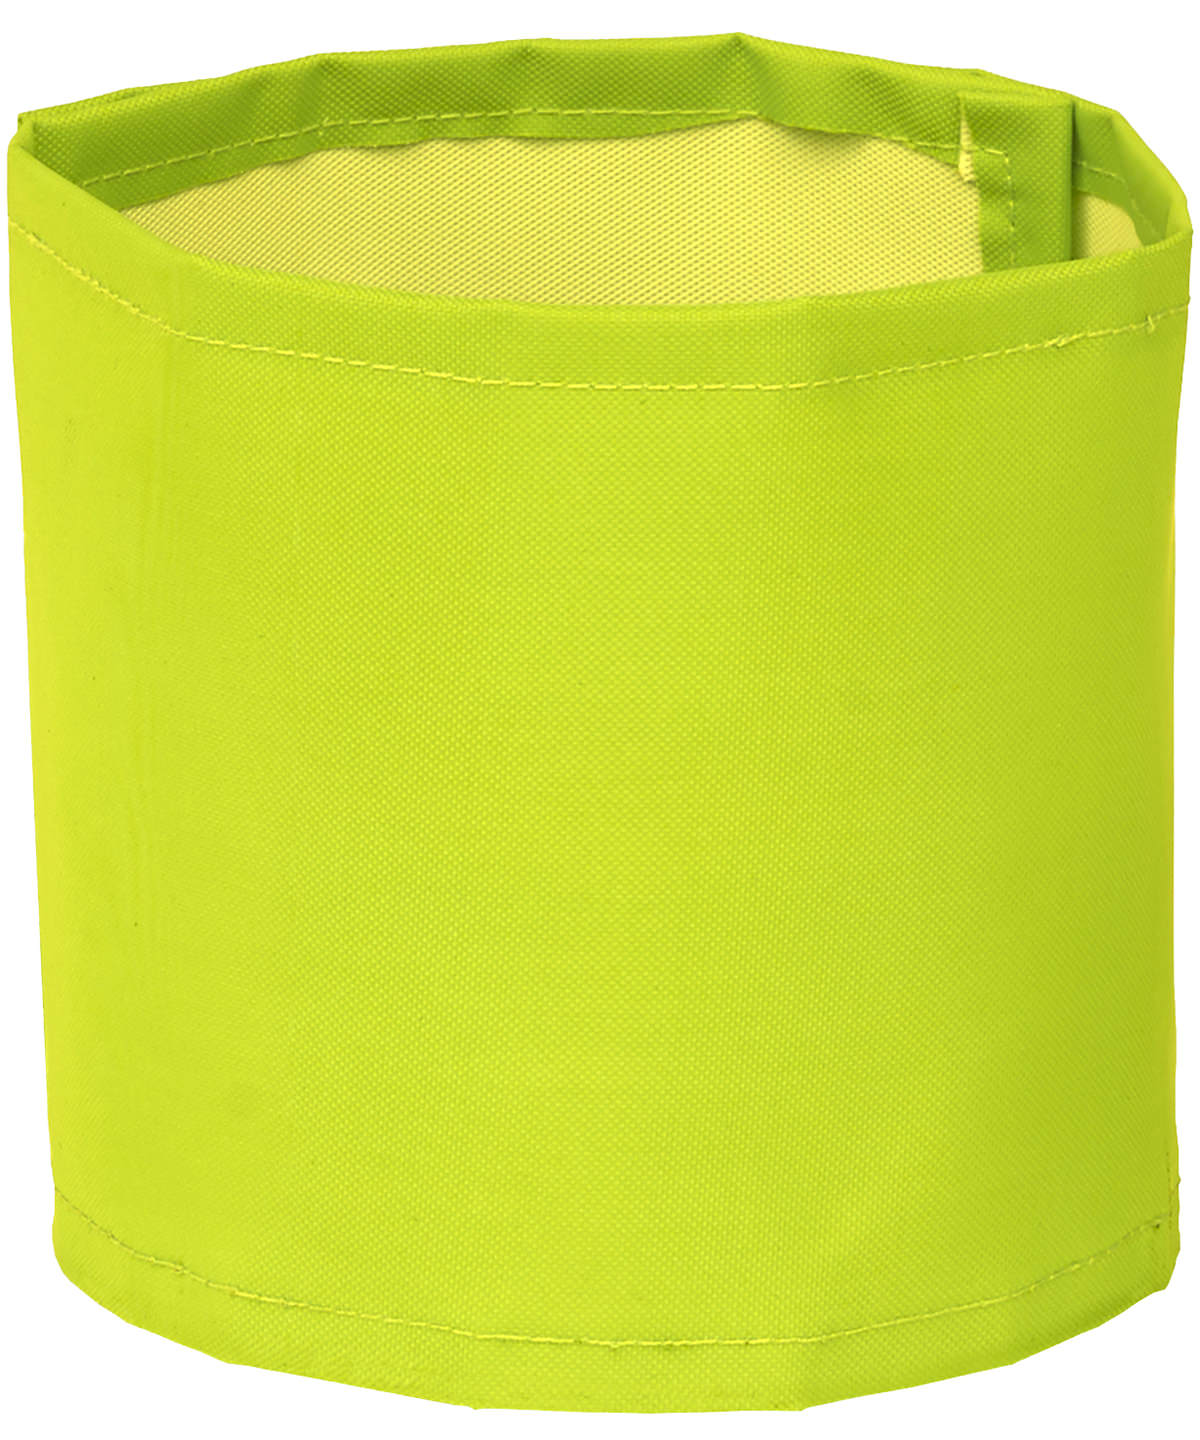 Print-Me Armbands (Hvw066) (Pack Of 20) Fluorescent Yellow Size Large/XL